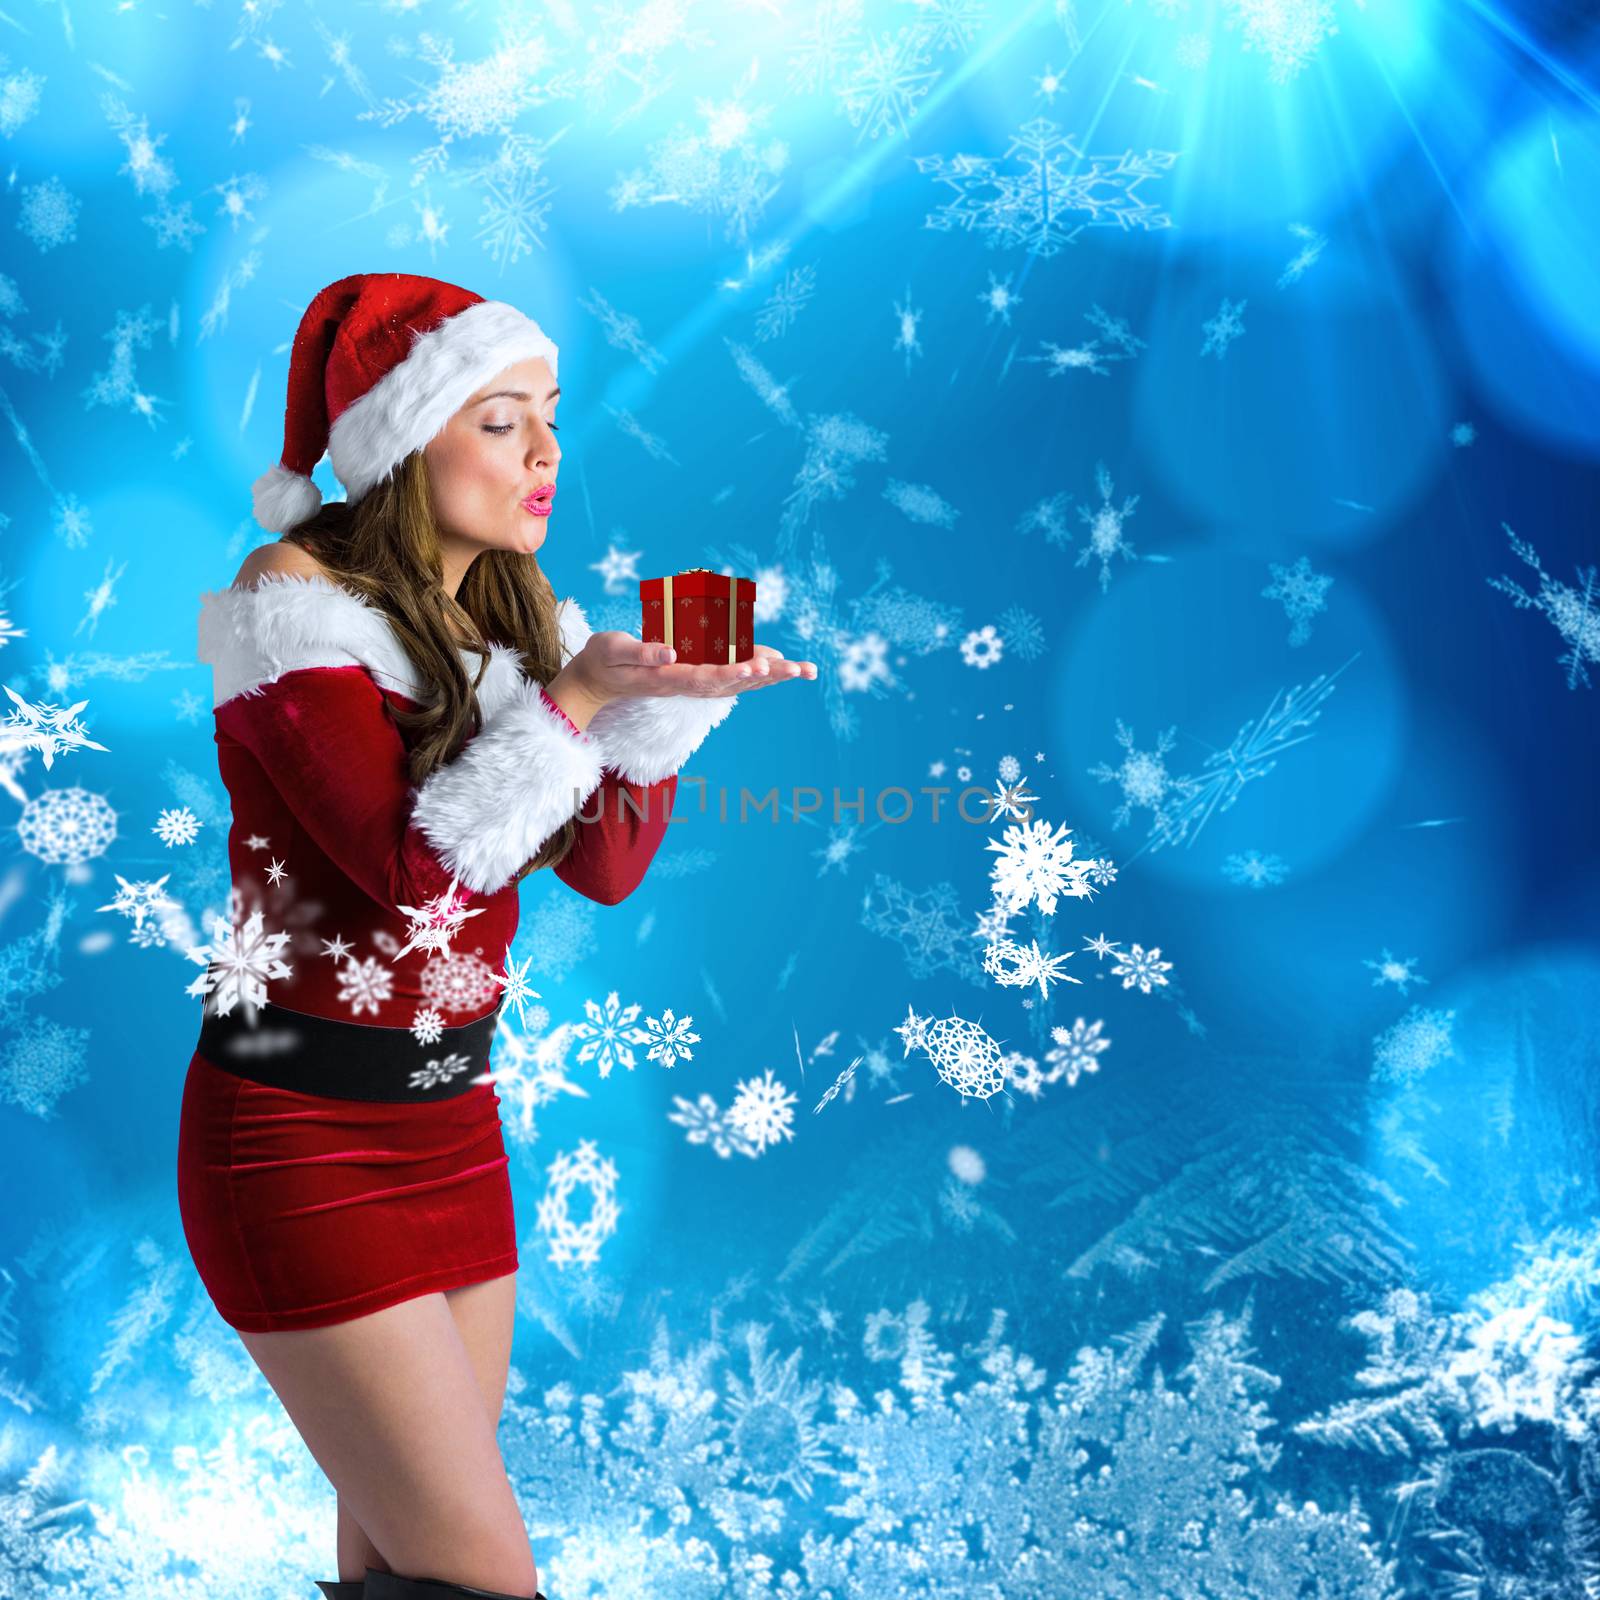 Pretty girl in santa costume holding hand out against blue snow flake pattern design